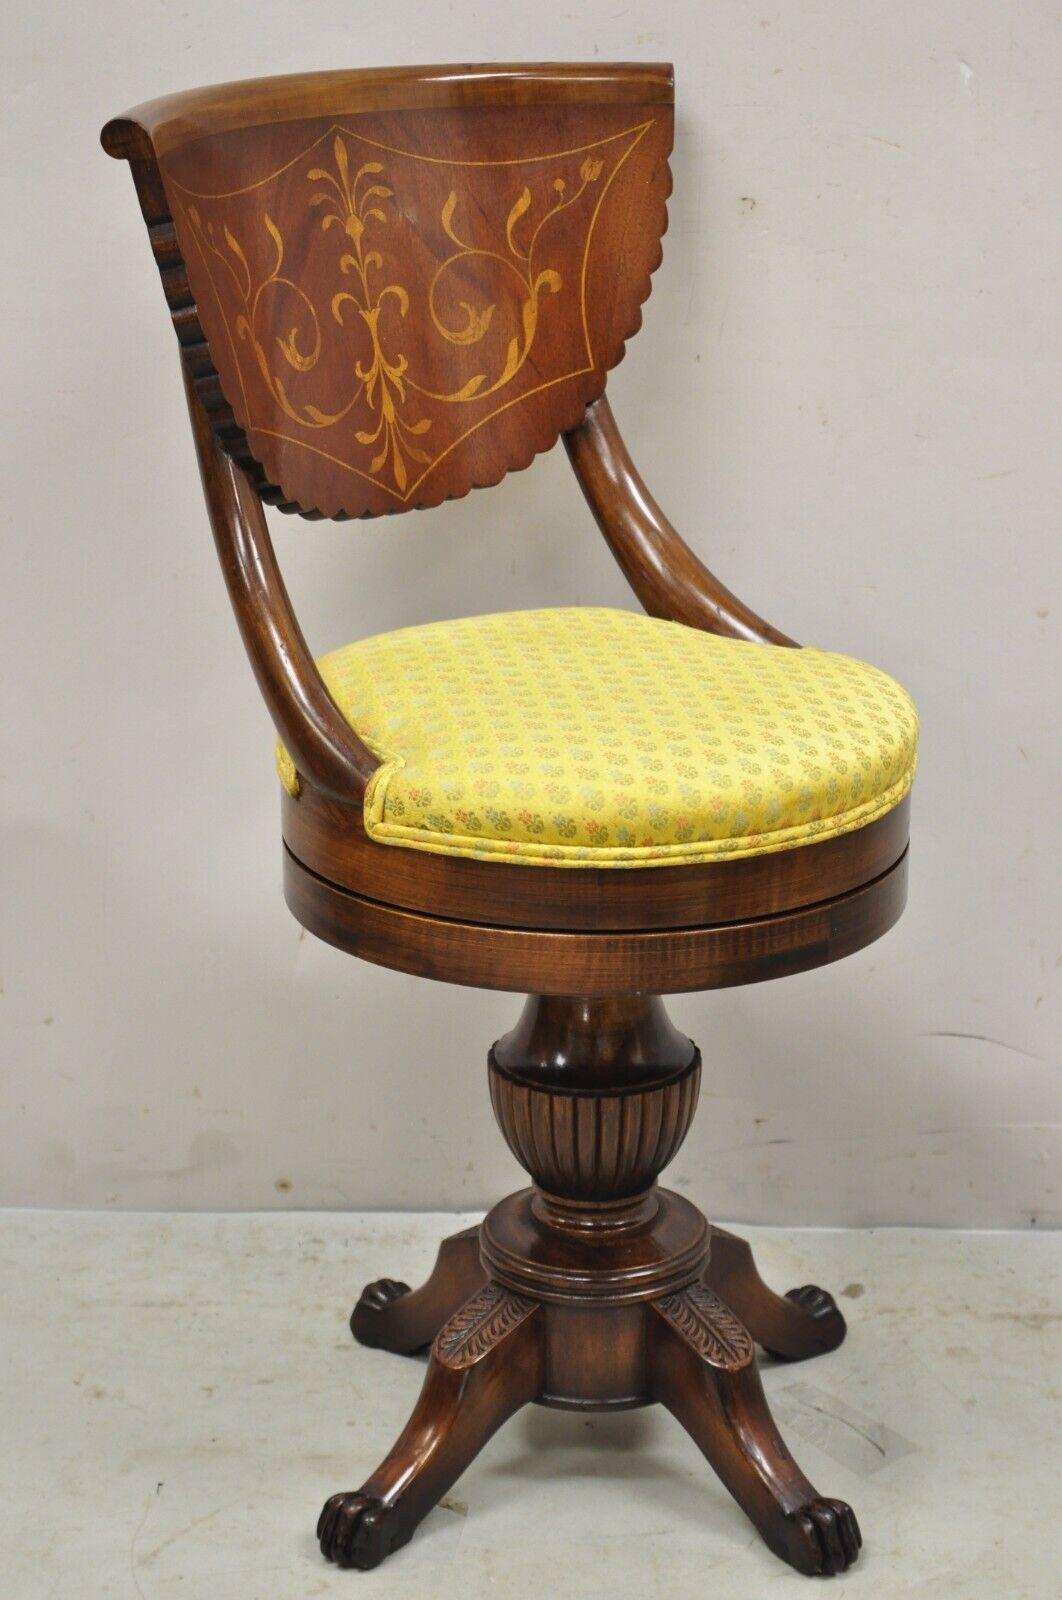 Antique Empire Regency Satinwood inlay mahogany Swivel Harpist stool vanity side chair. Item features Swivel seat, beautiful satinwood inlay, carved paw feet, pedestal base, solid wood frame, beautiful wood grain, nicely carved details. Circa Early